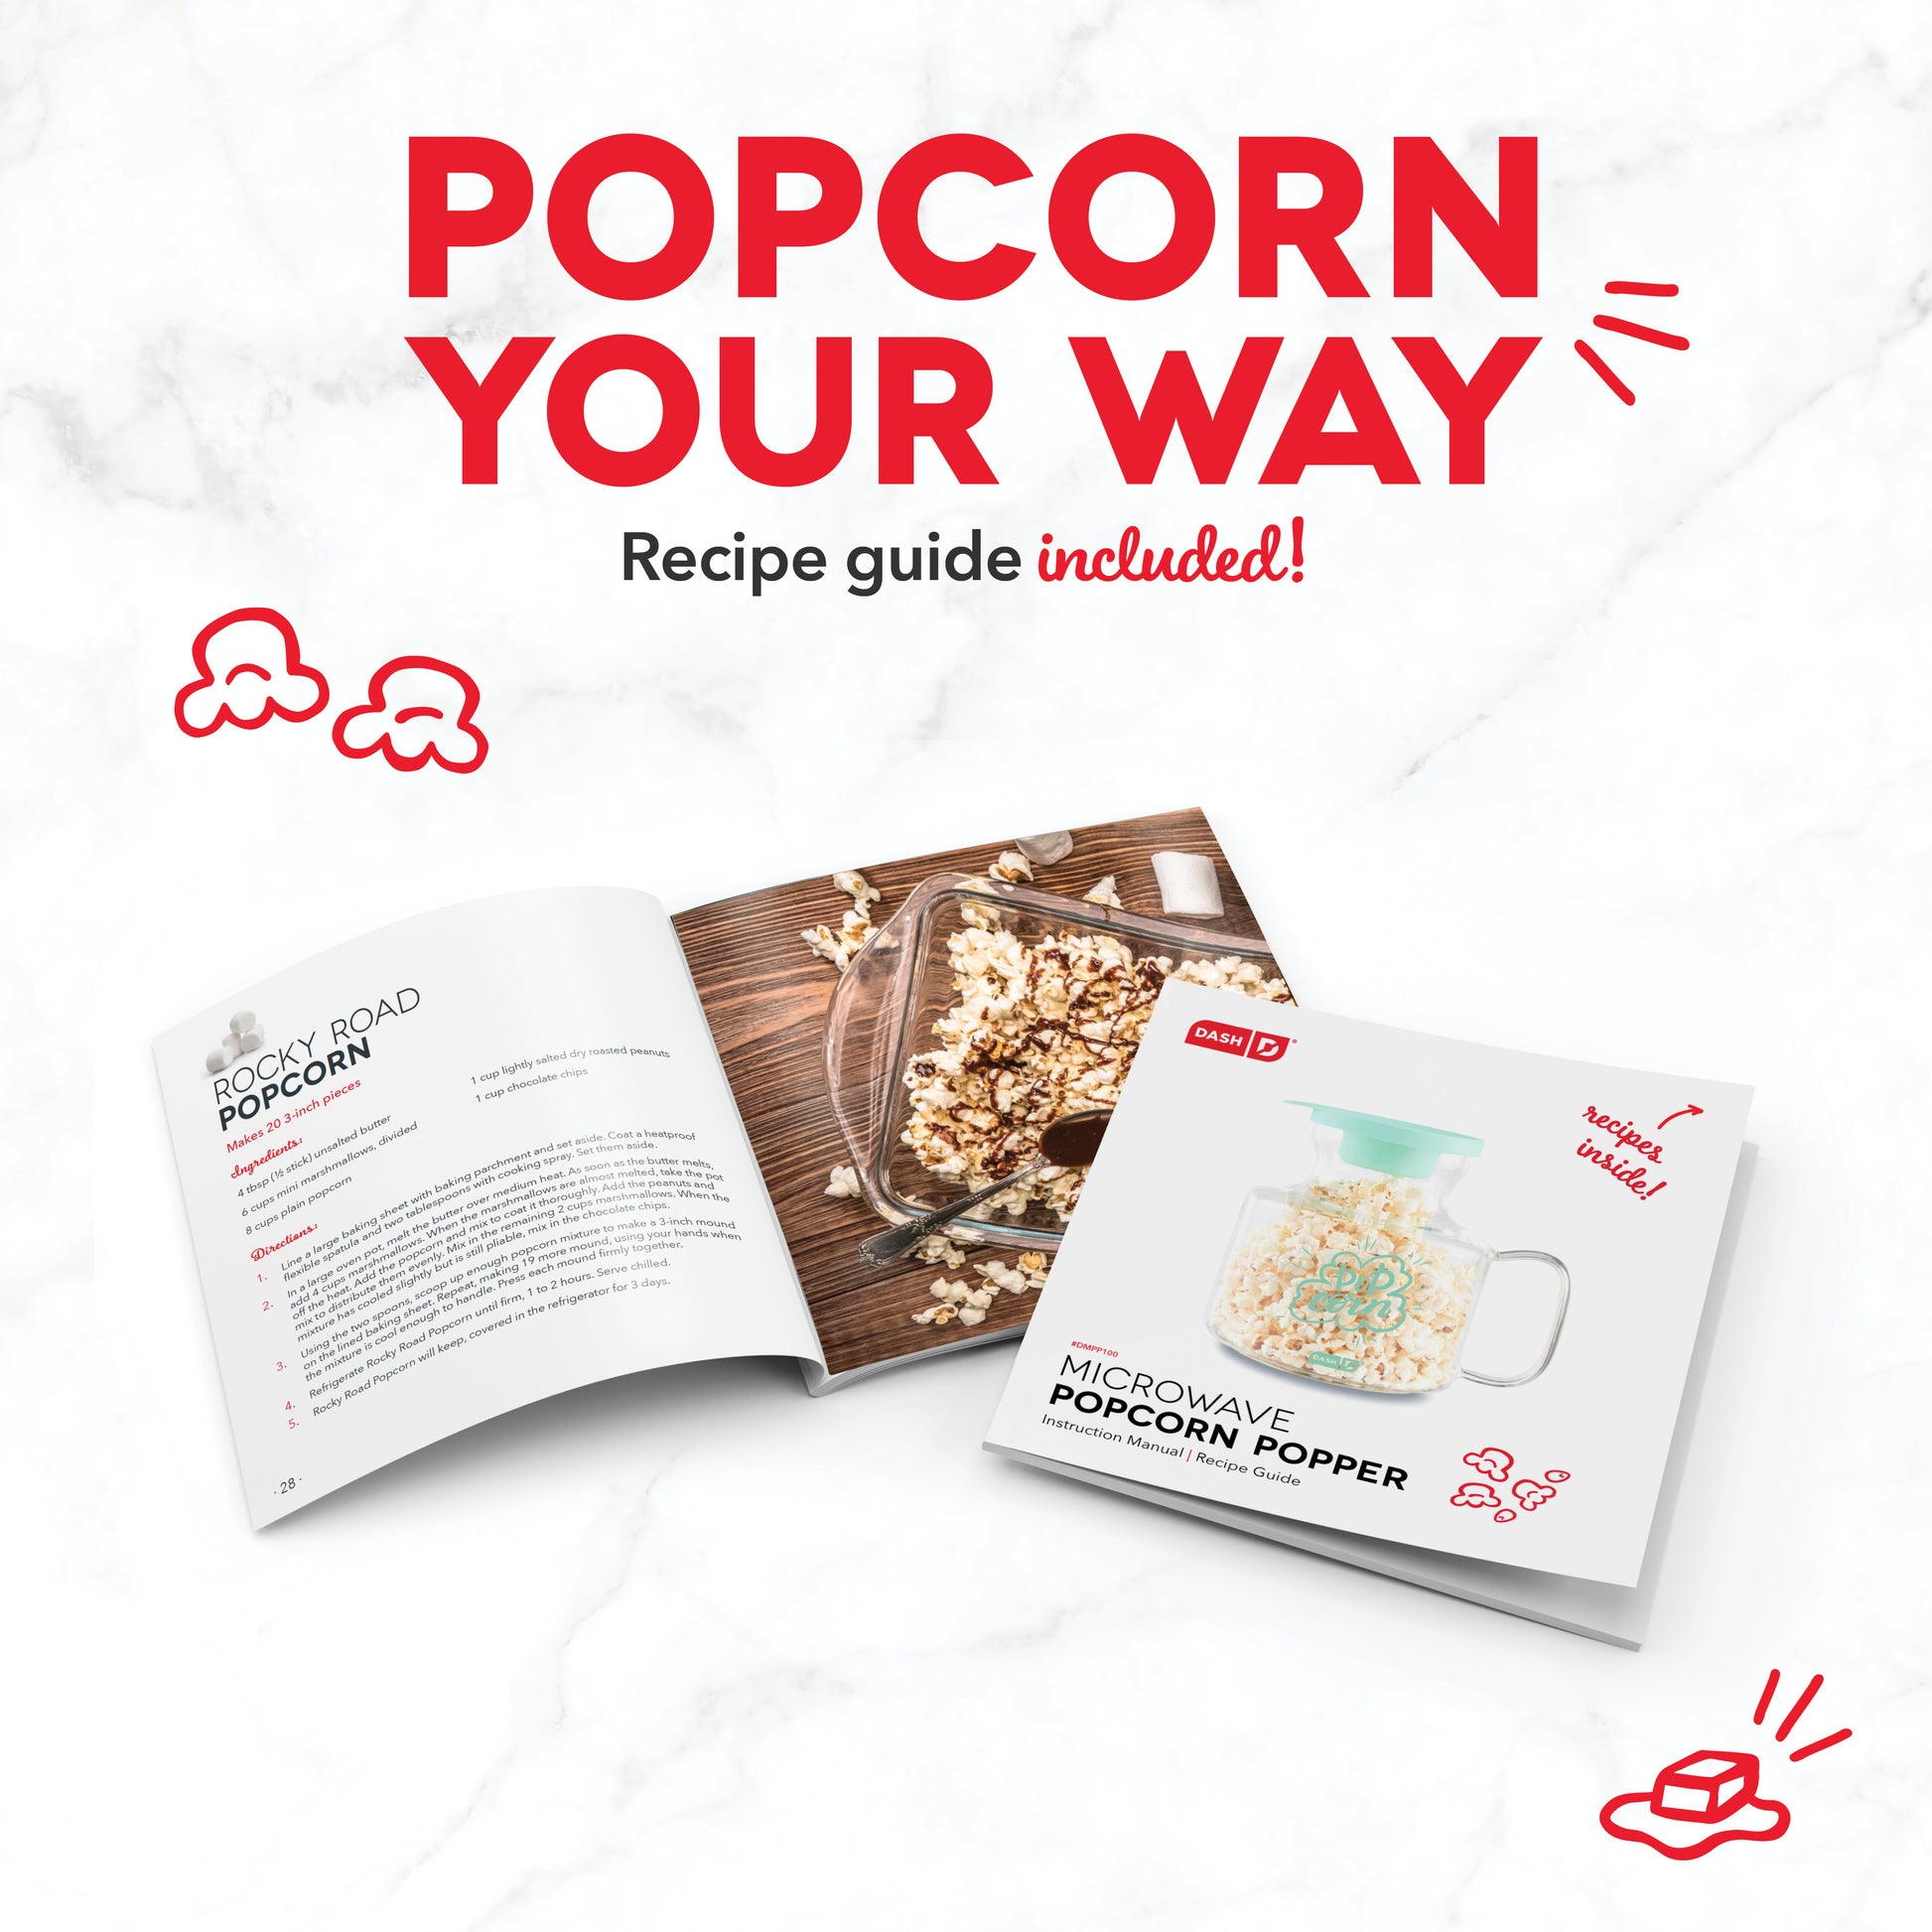 This Microwave Popcorn Popper Is the Fastest Route to My Favorite Snack